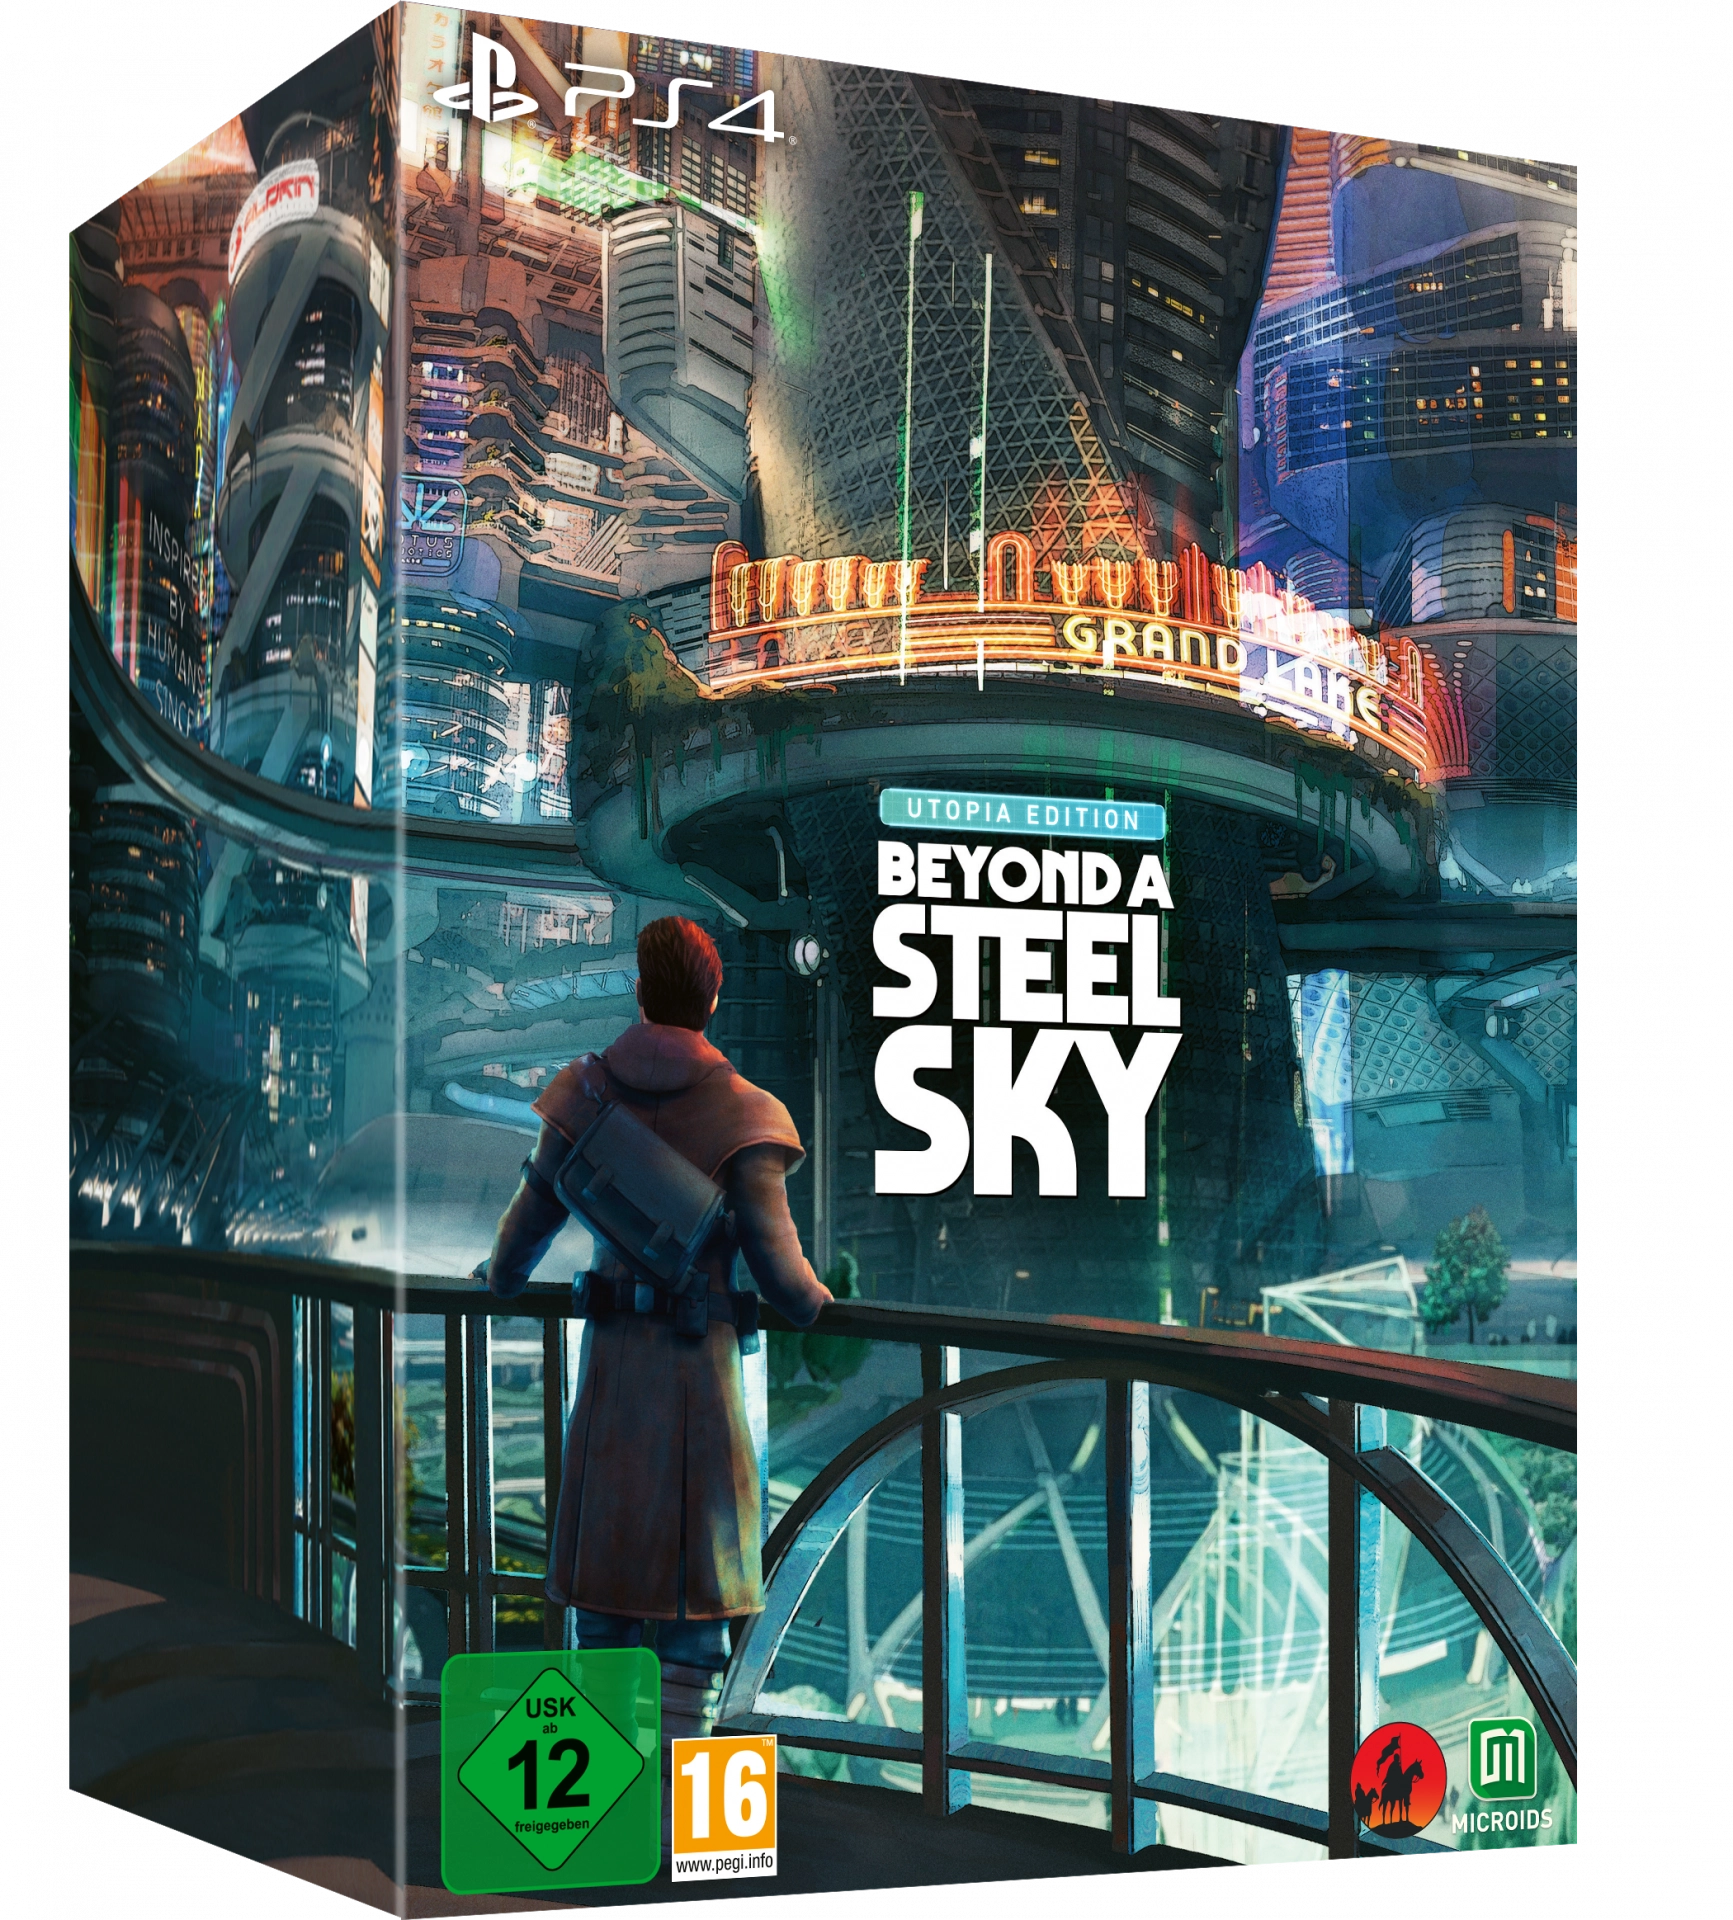 Beyond a Steel Sky - Utopia Edition (PS4), Revolution Software